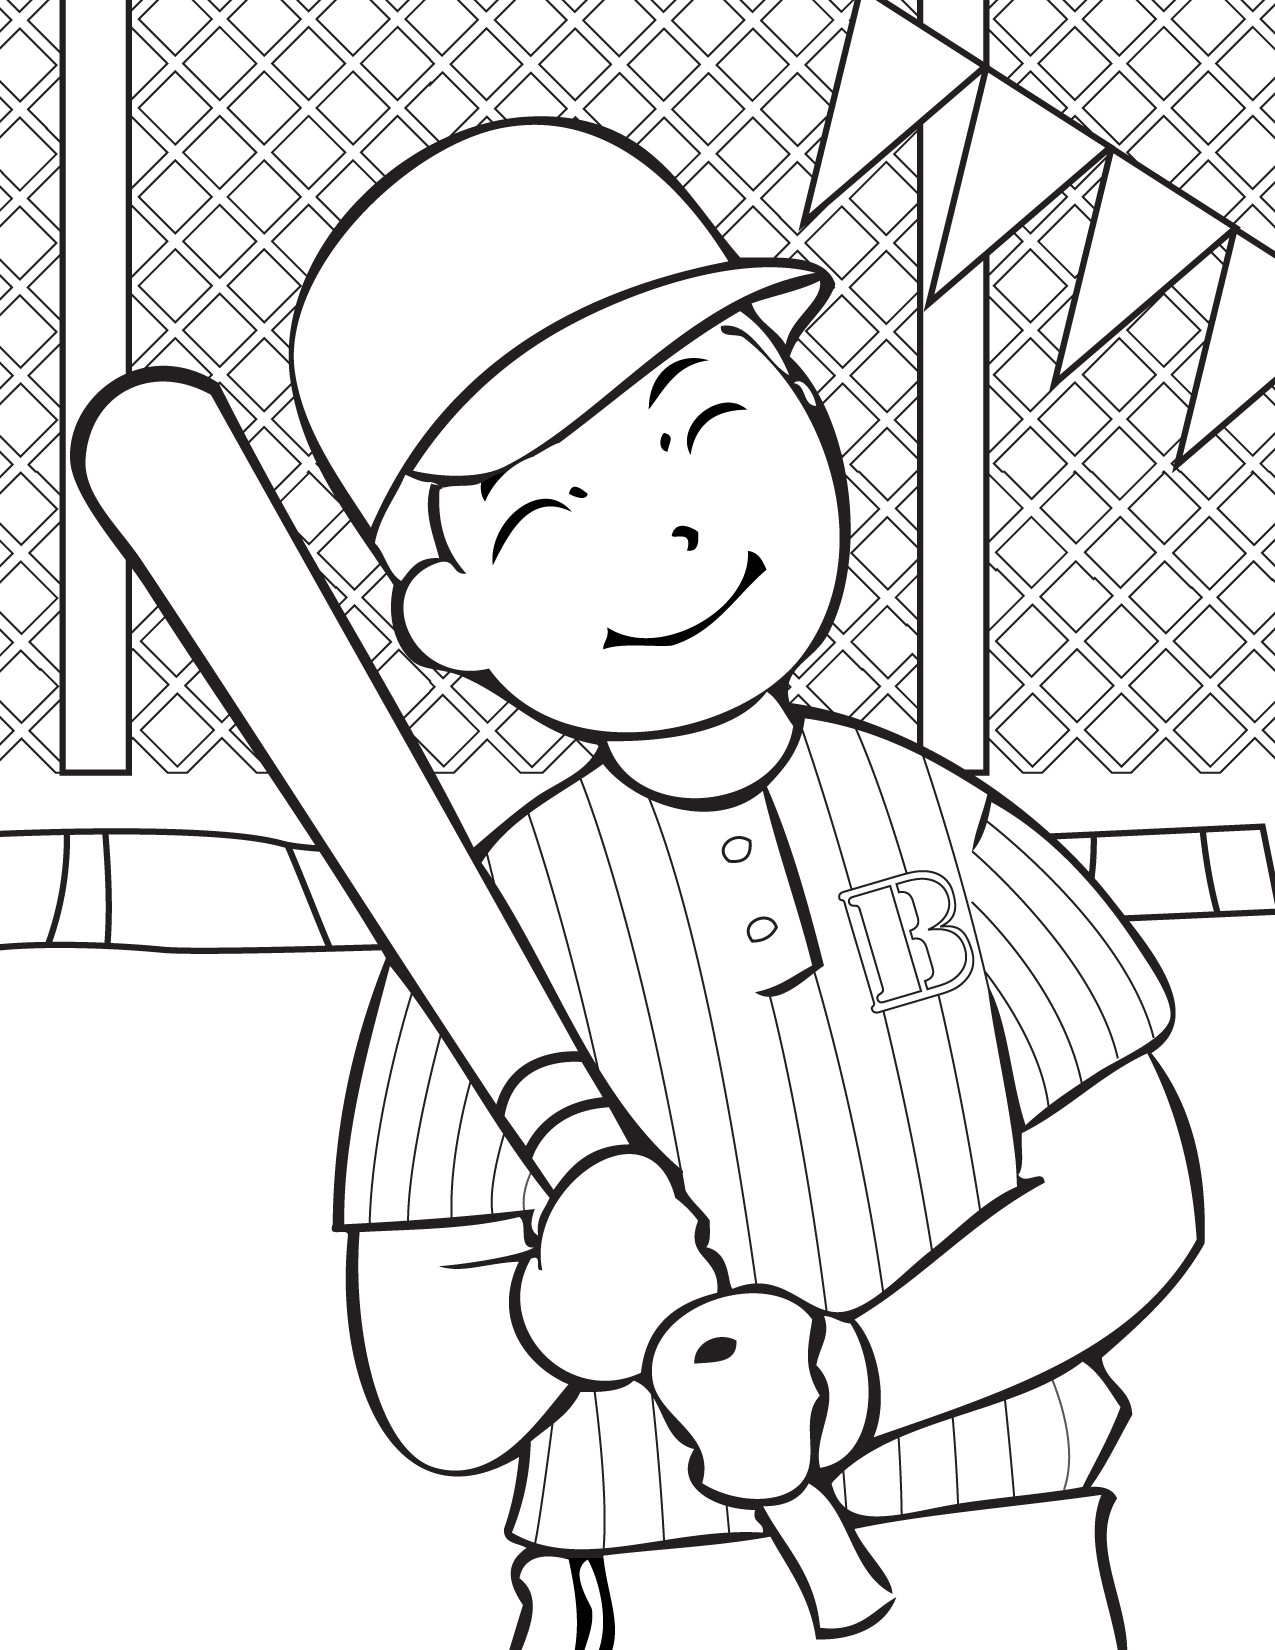 Coloring Pages For Boys Baseball
 Free Printable Baseball Coloring Pages for Kids Best